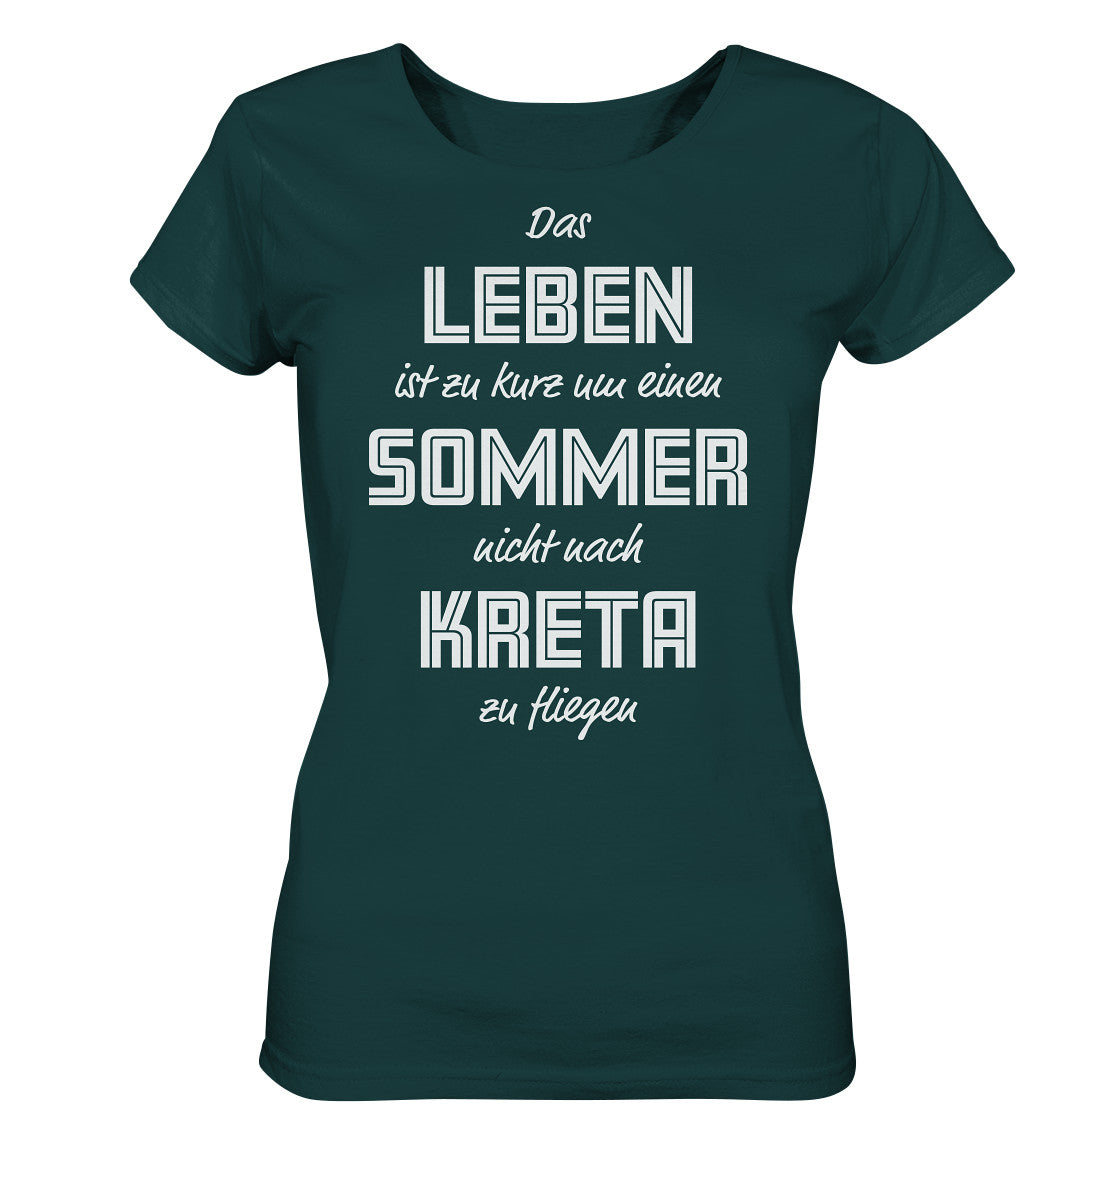 Life is too short not to fly to Crete for a summer - Ladies Organic Shirt